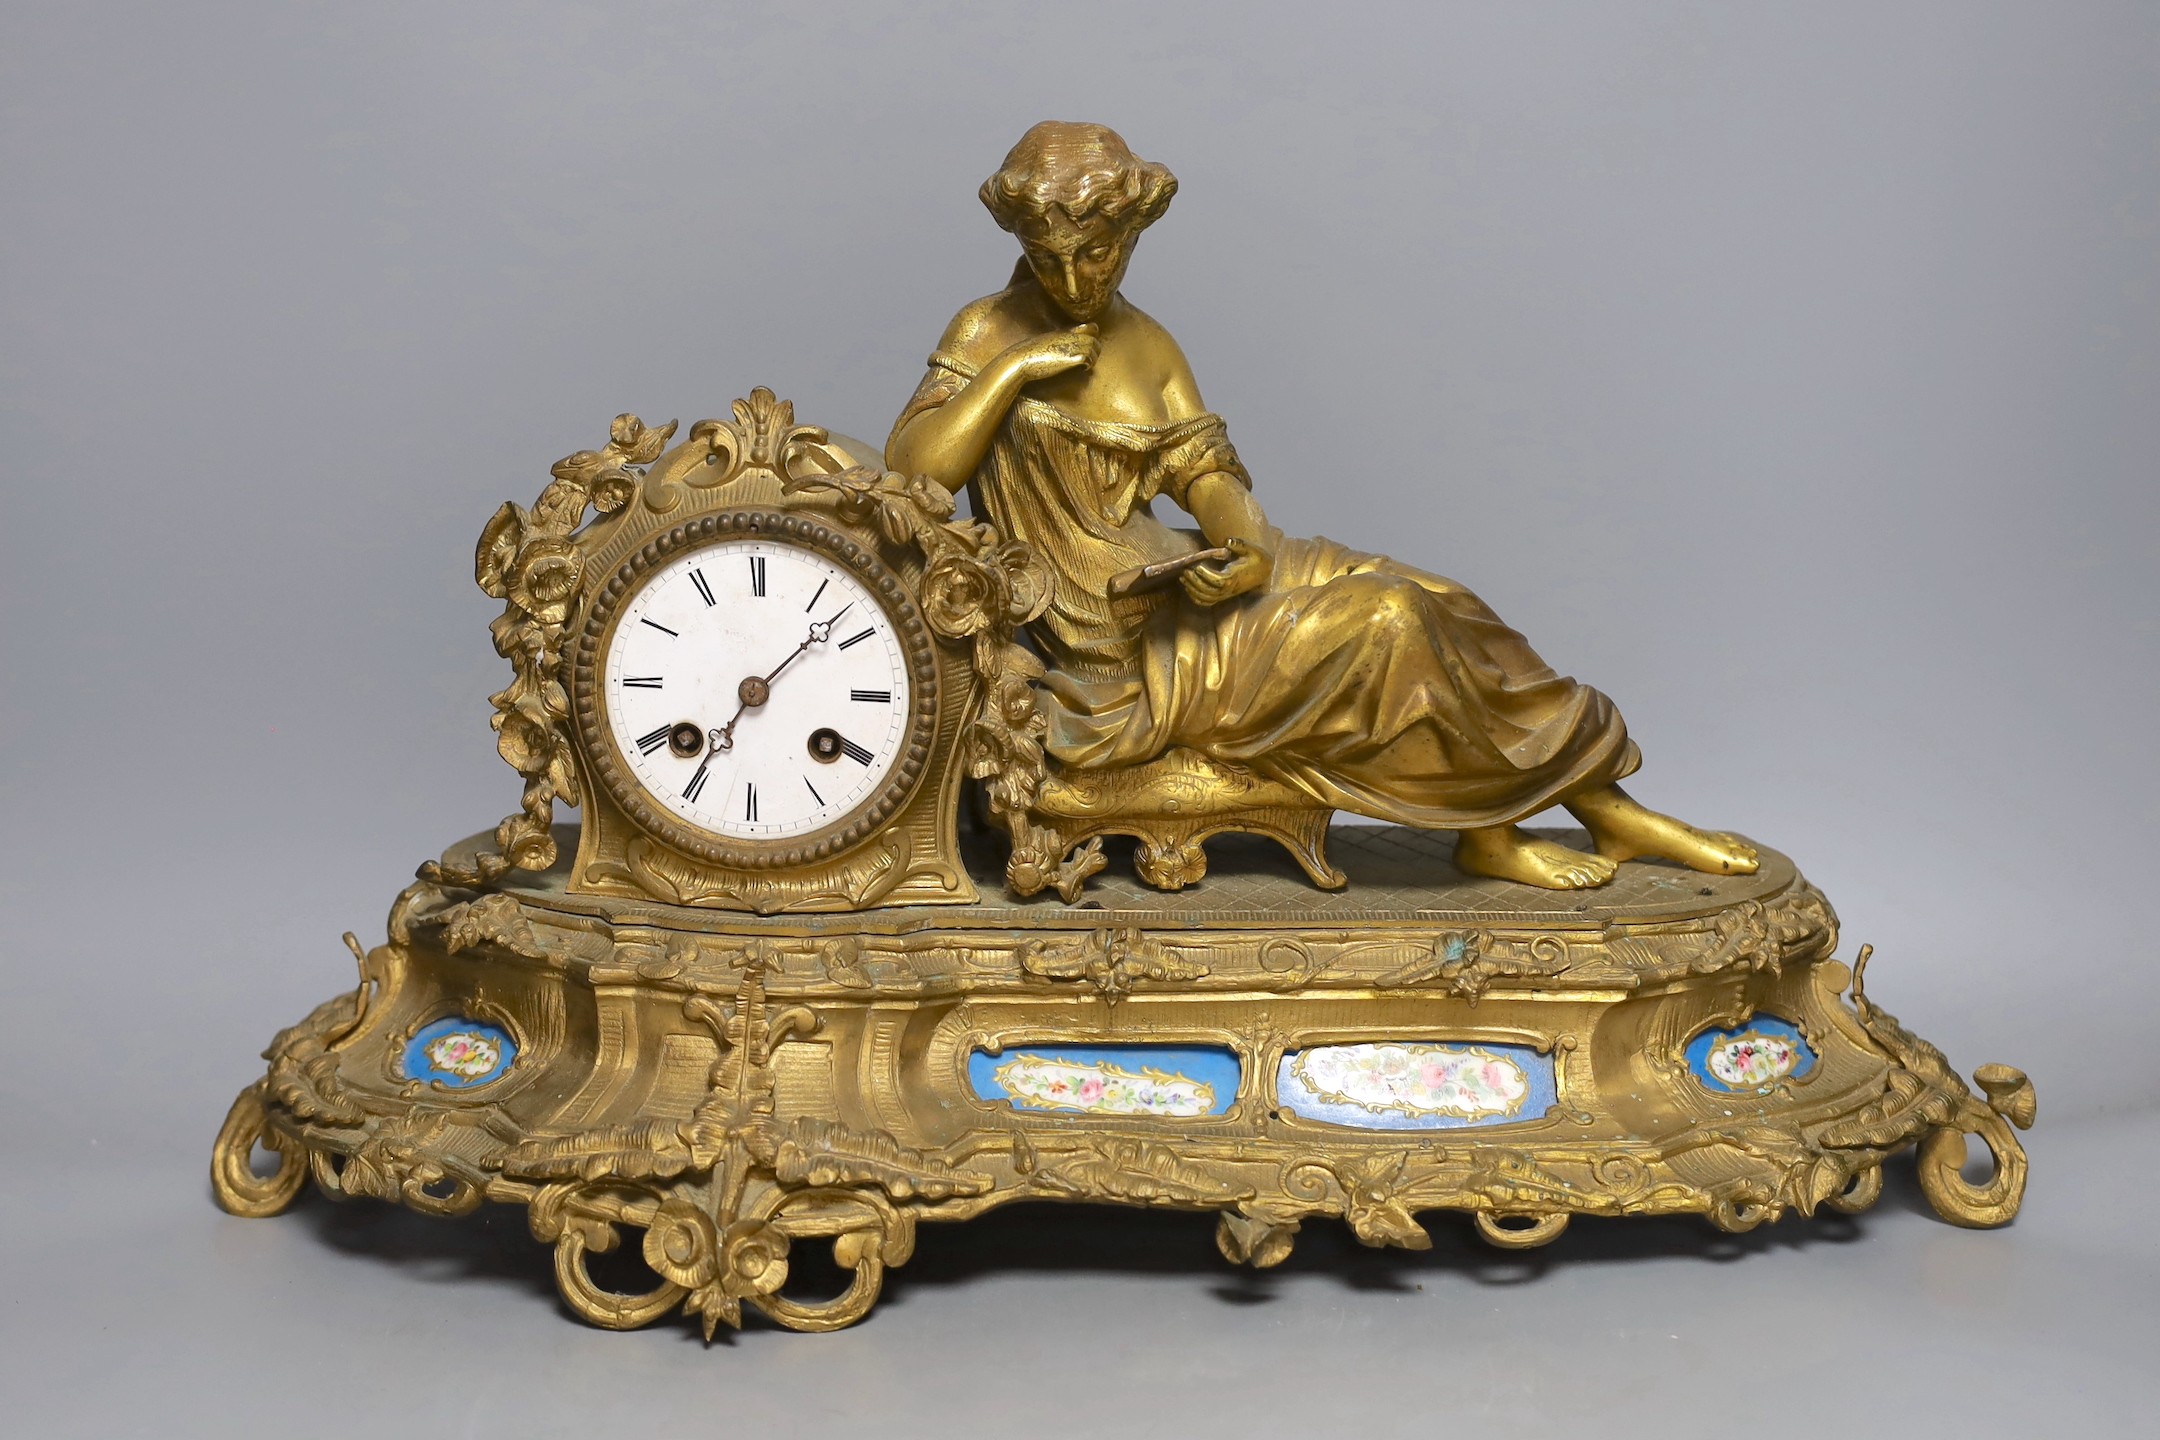 A French gilt metal mantel clock with blue enamel floral decoration and mounted lady reading - 47cm long